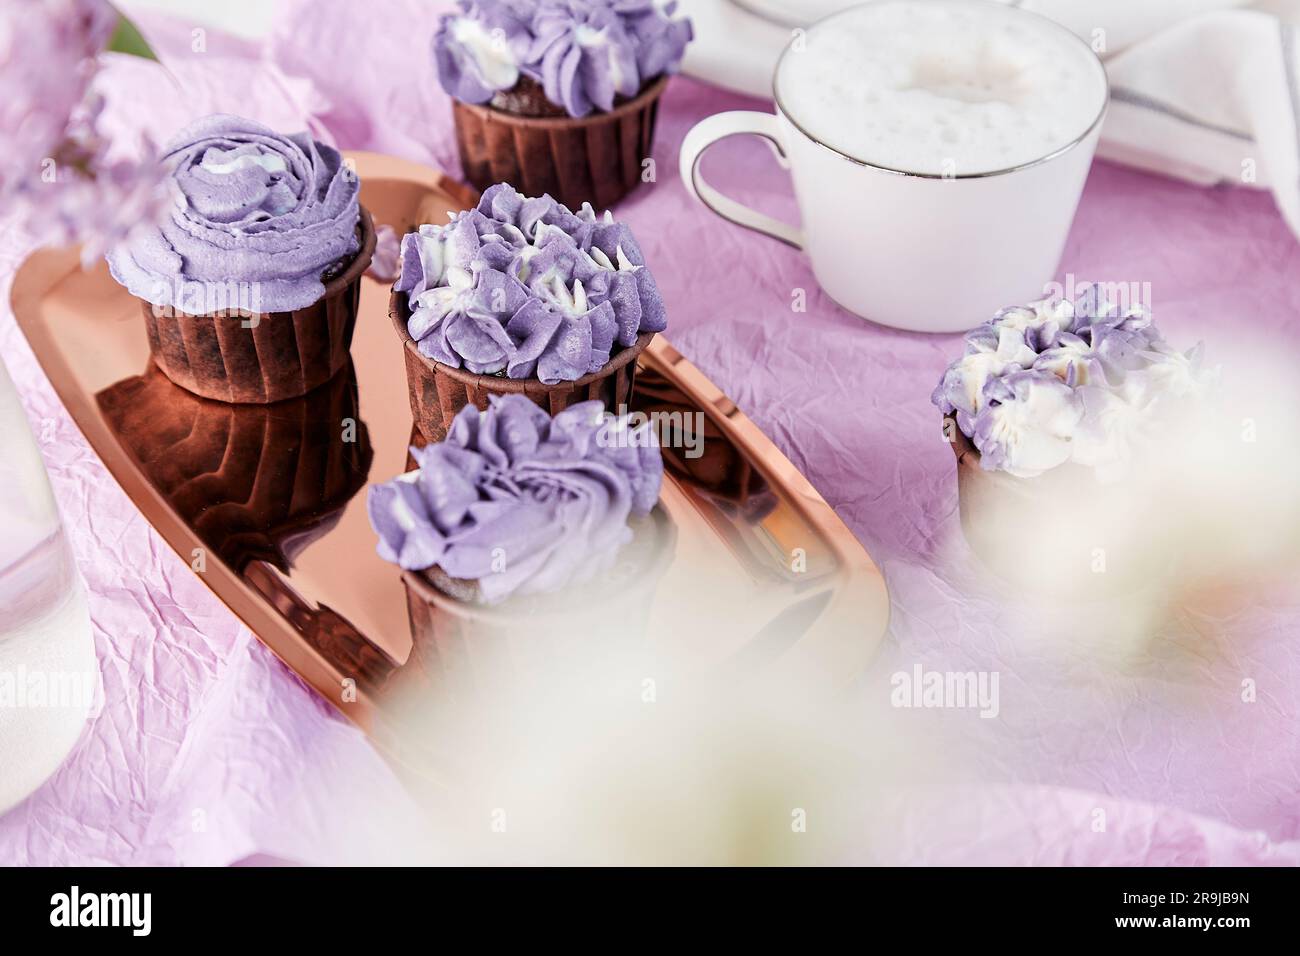 Aesthetics festive sweet table. Purple french cupcakes with cup of coffee among lilac flowers. Feminine lifestyle. Stock Photo